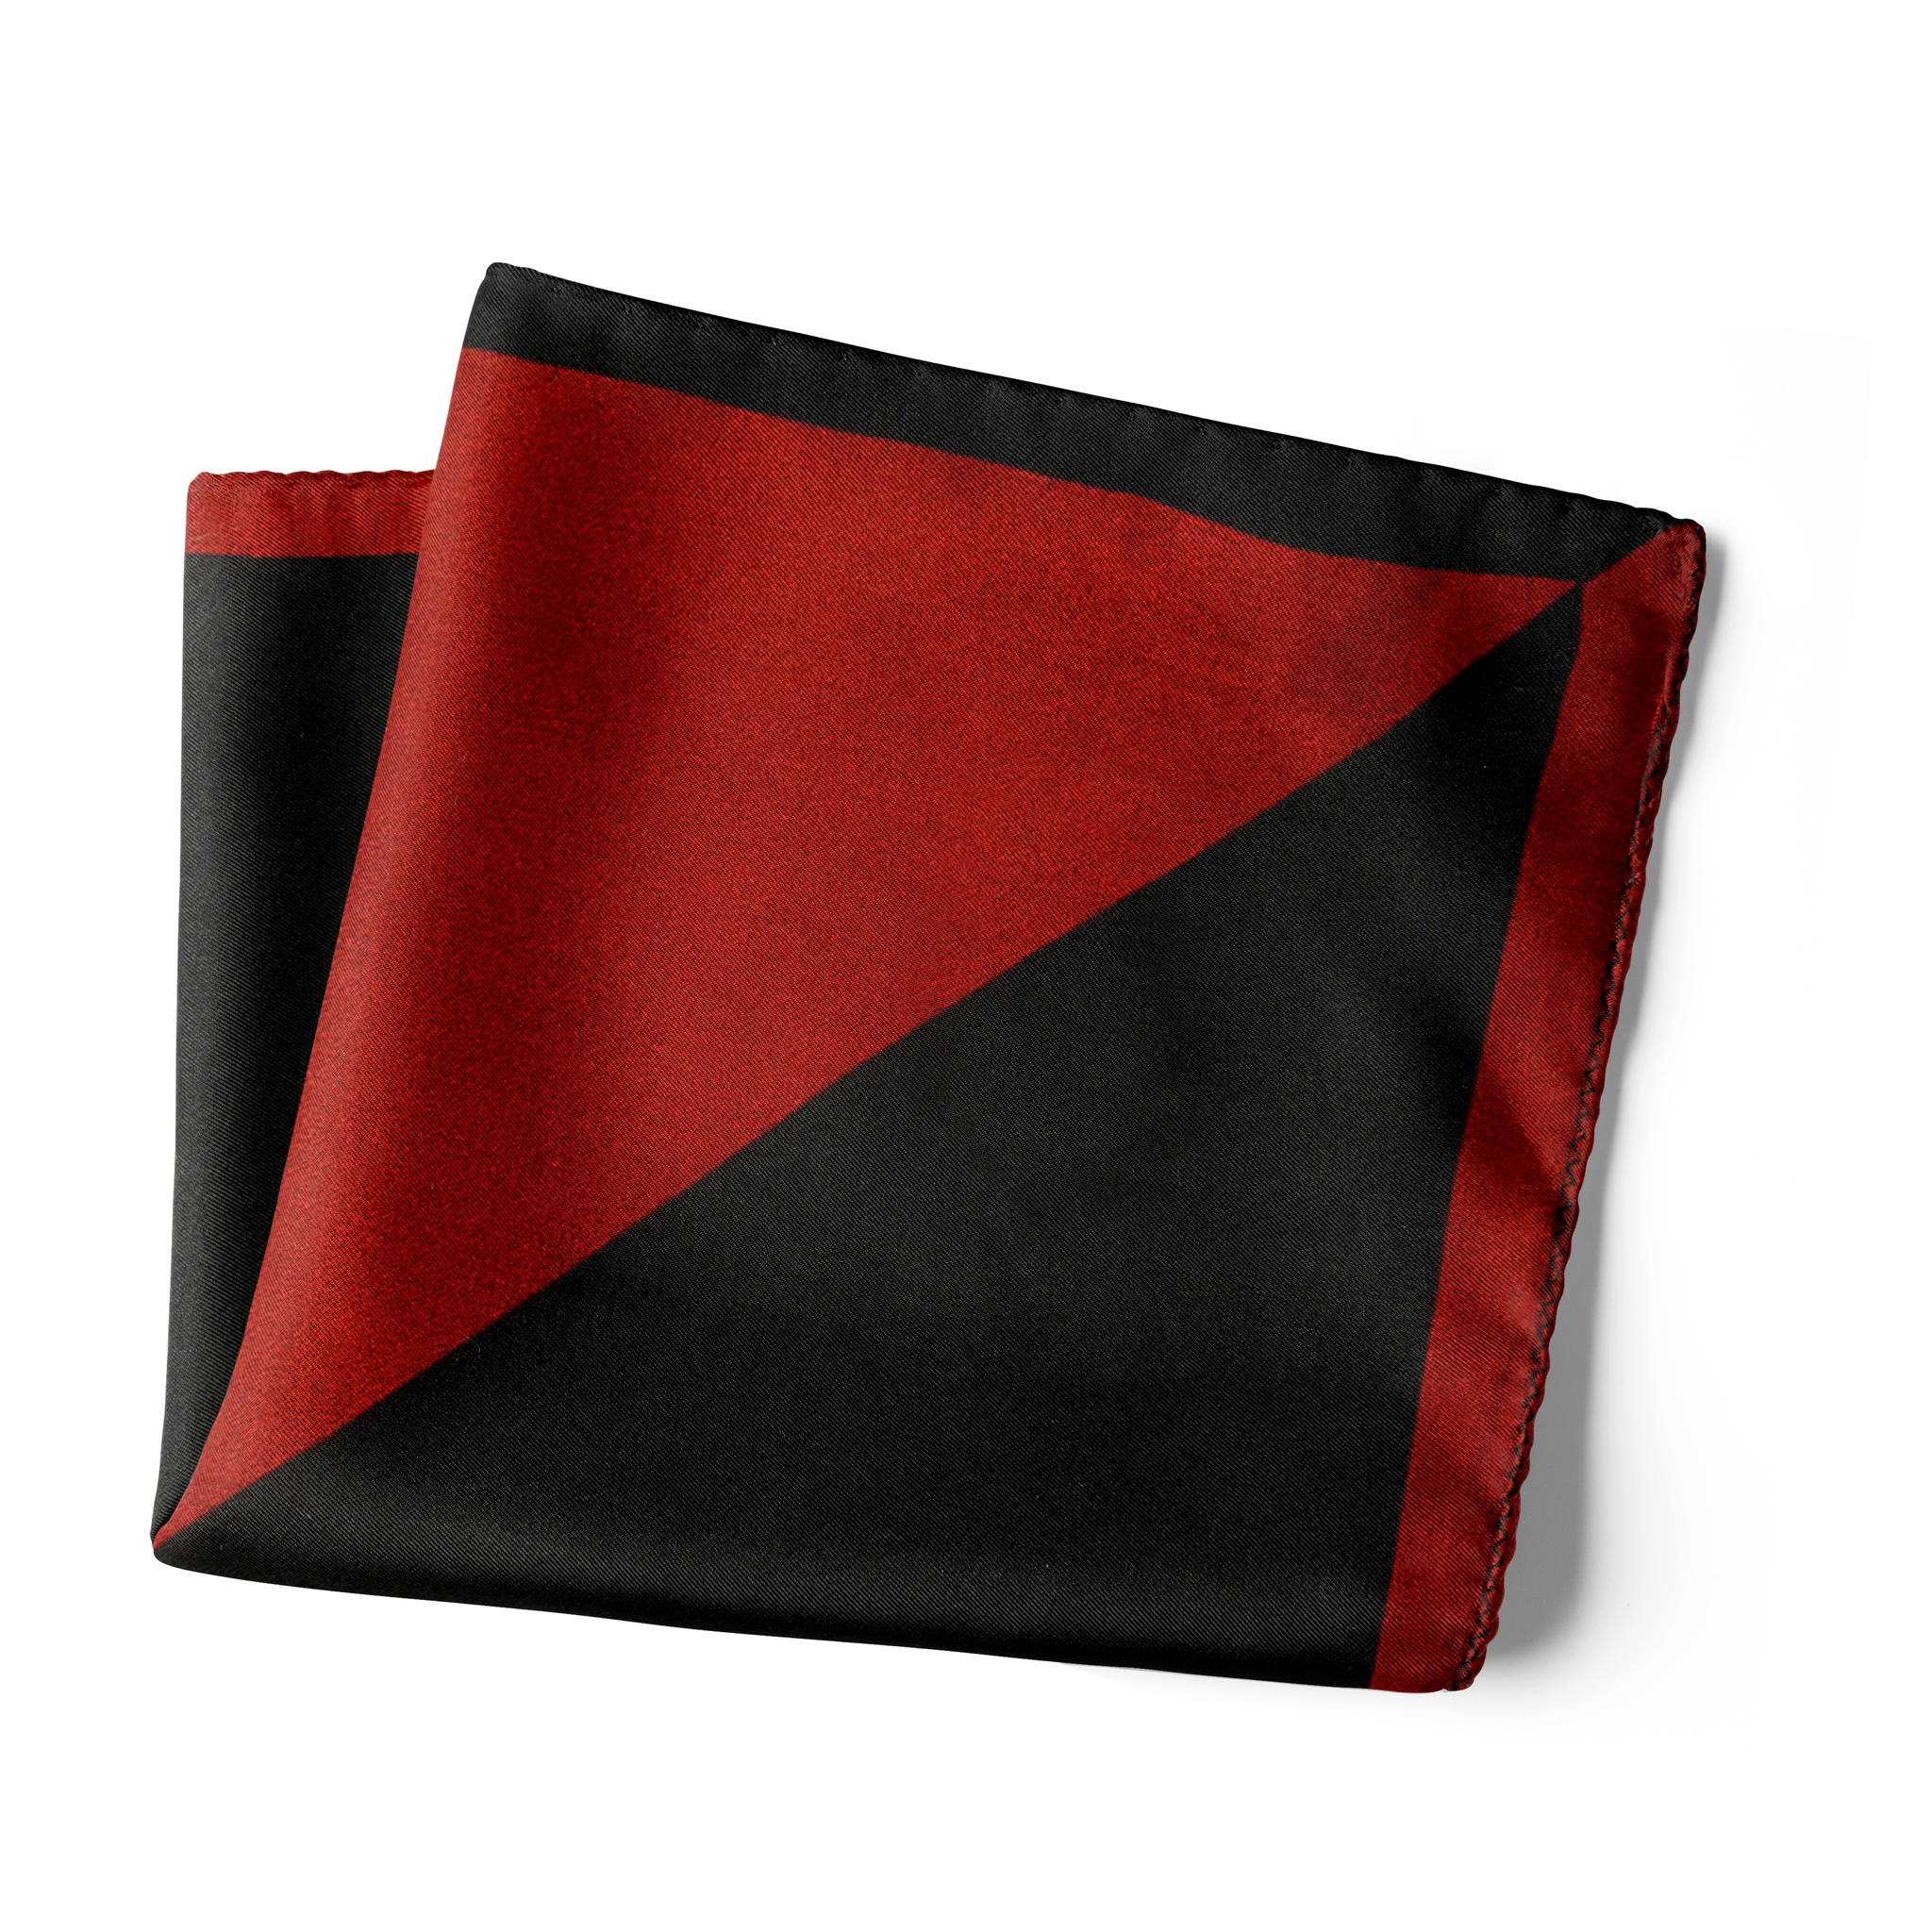 Chokore 2-in-1 Red & Black Silk Pocket Square from the Solids Line